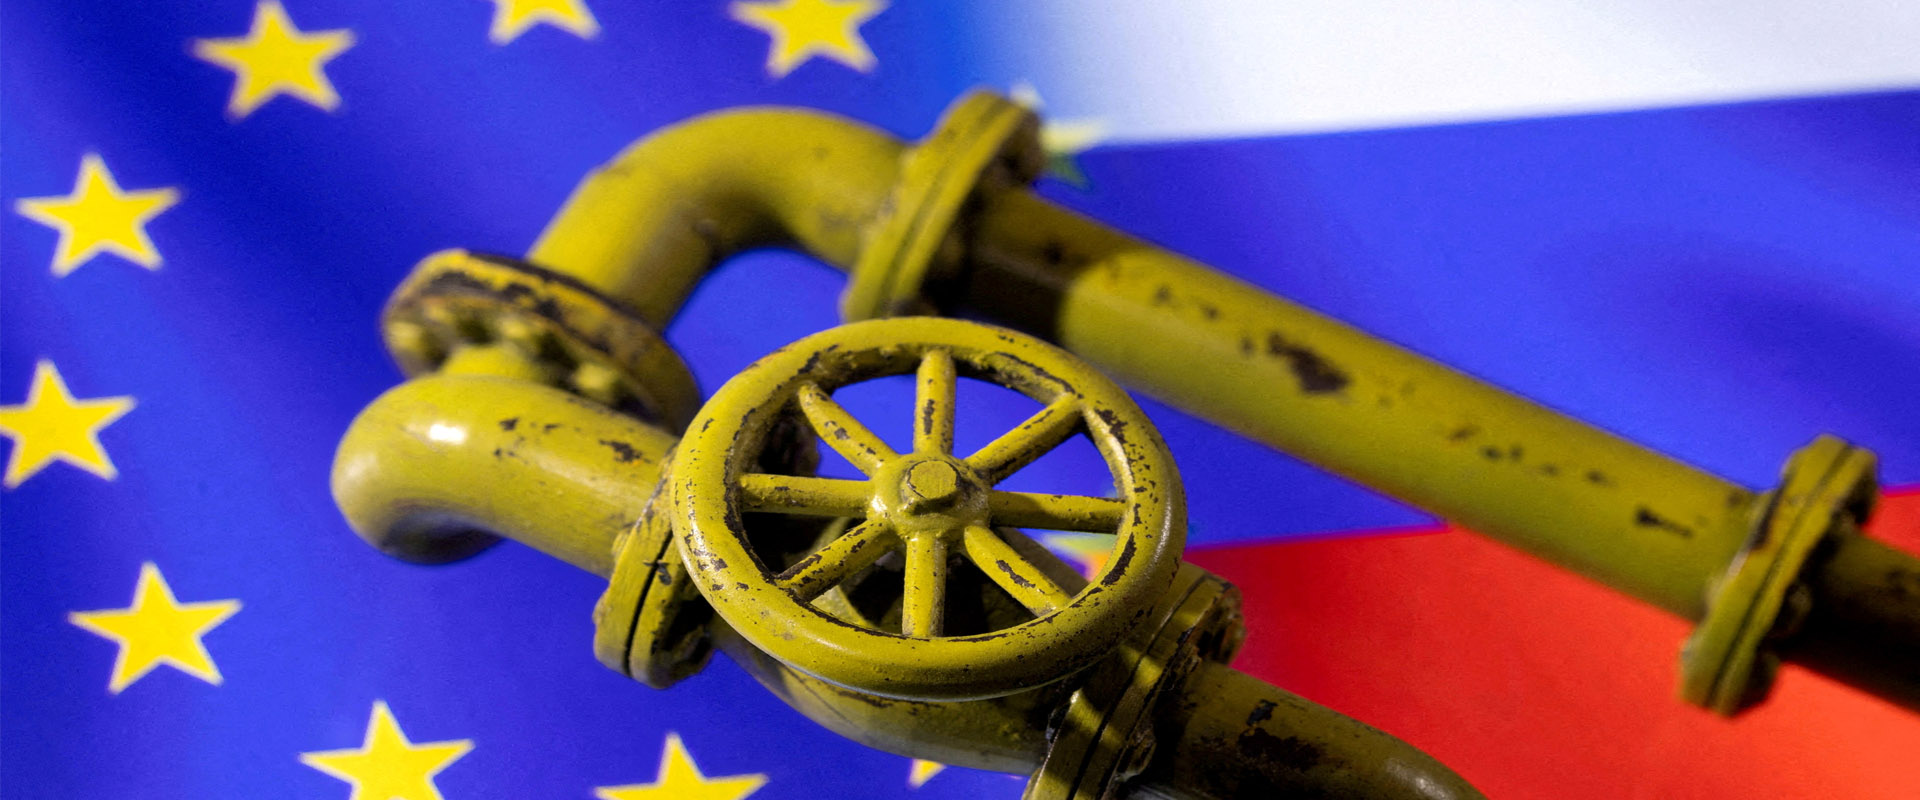 How does EU plan to end its reliance on Russian energy?